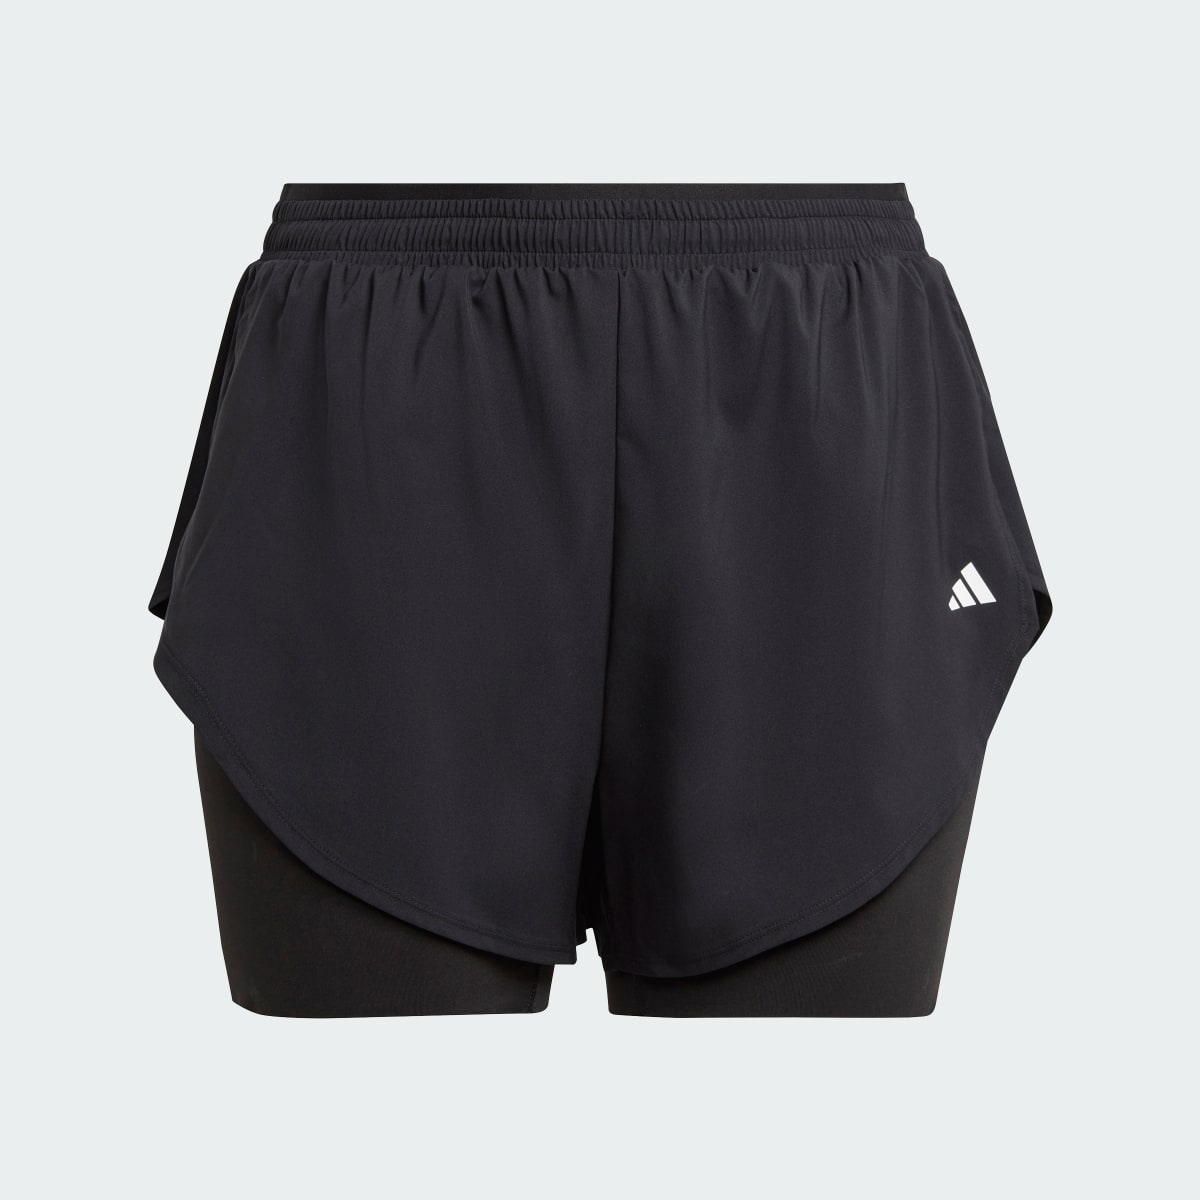 Adidas Designed for Training 2-in-1 Shorts (Plus Size). 4